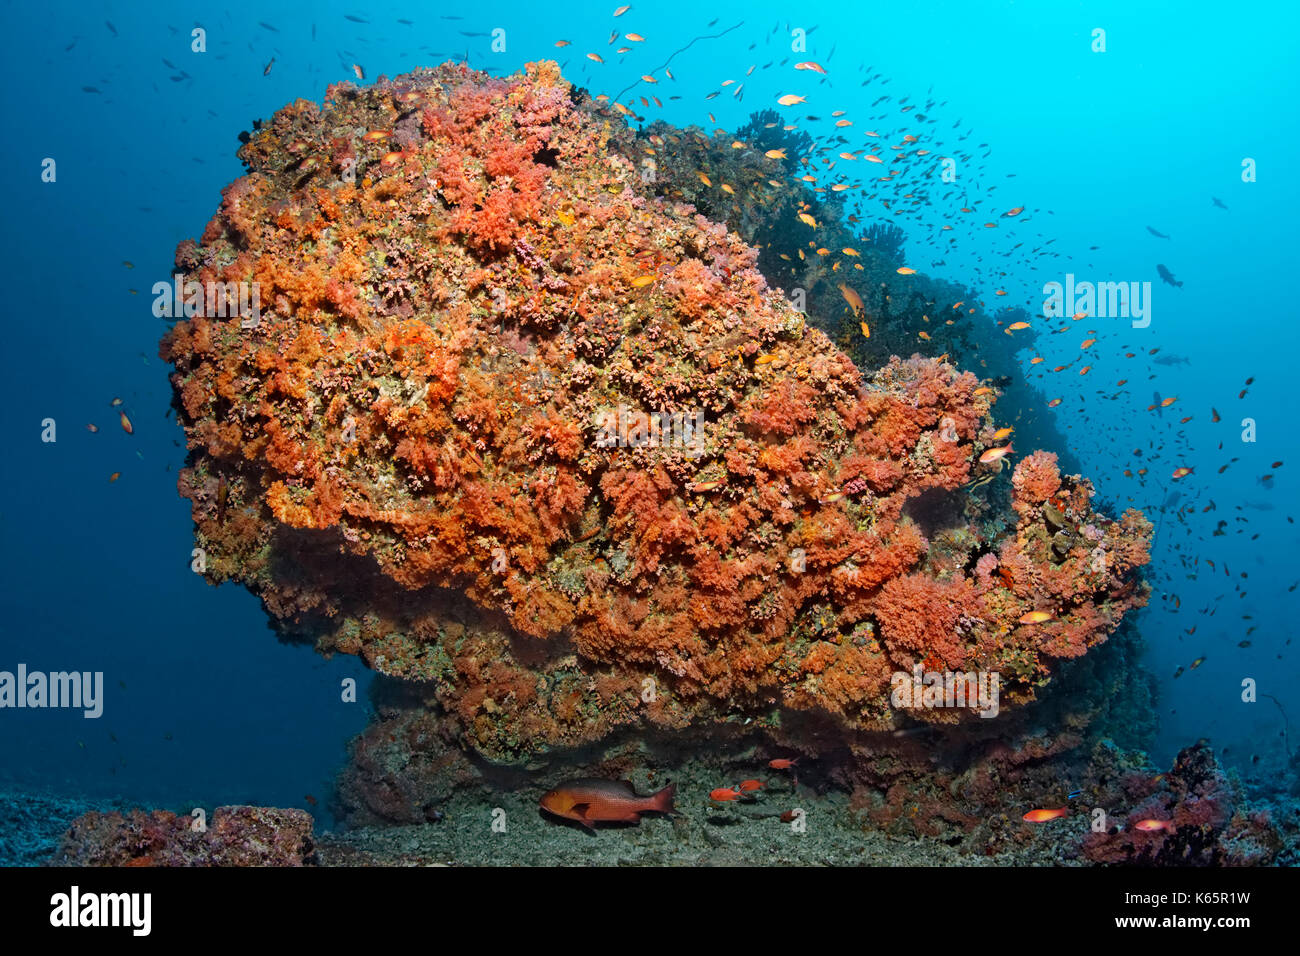 Coral reef, coral block, densely overgrown, various red soft corals (Dendronephthya sp.) and swarm of flagfish (Pseudanthias Stock Photo